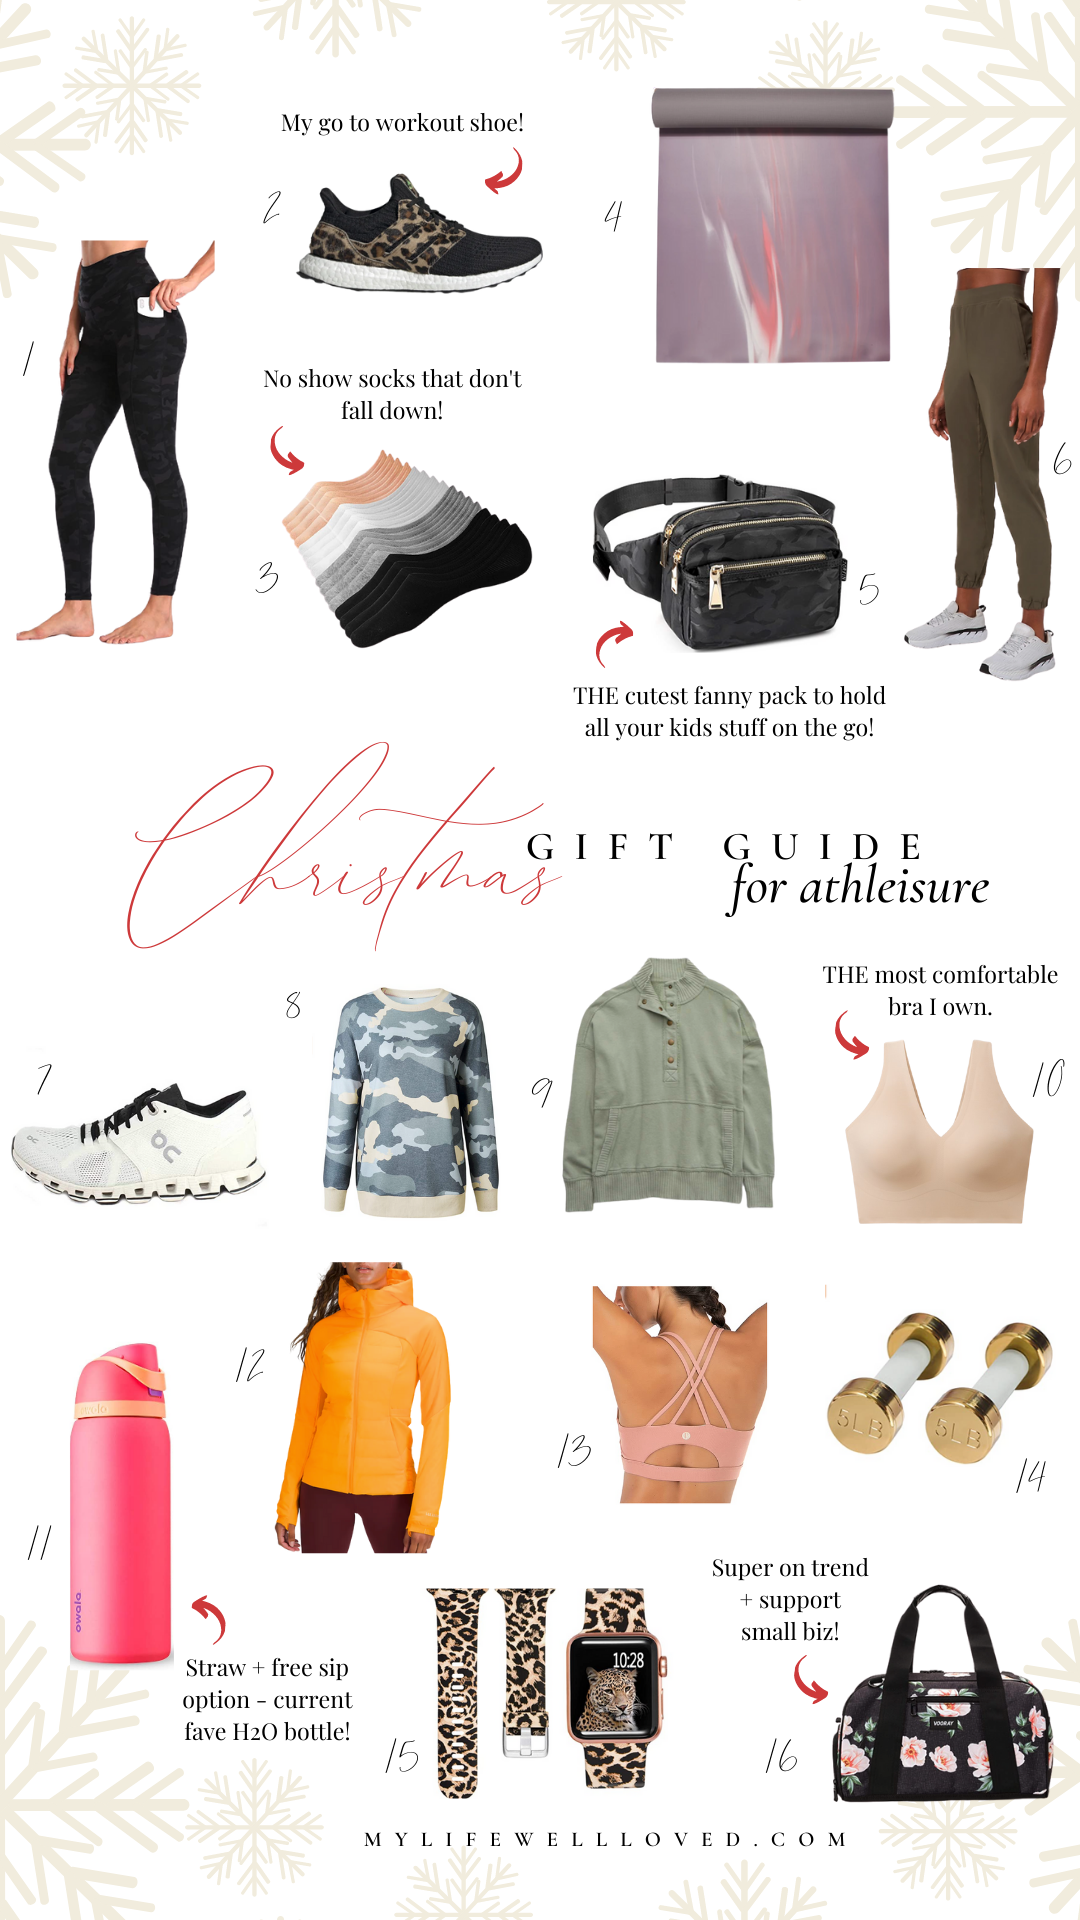 Fitness Gifts Guide